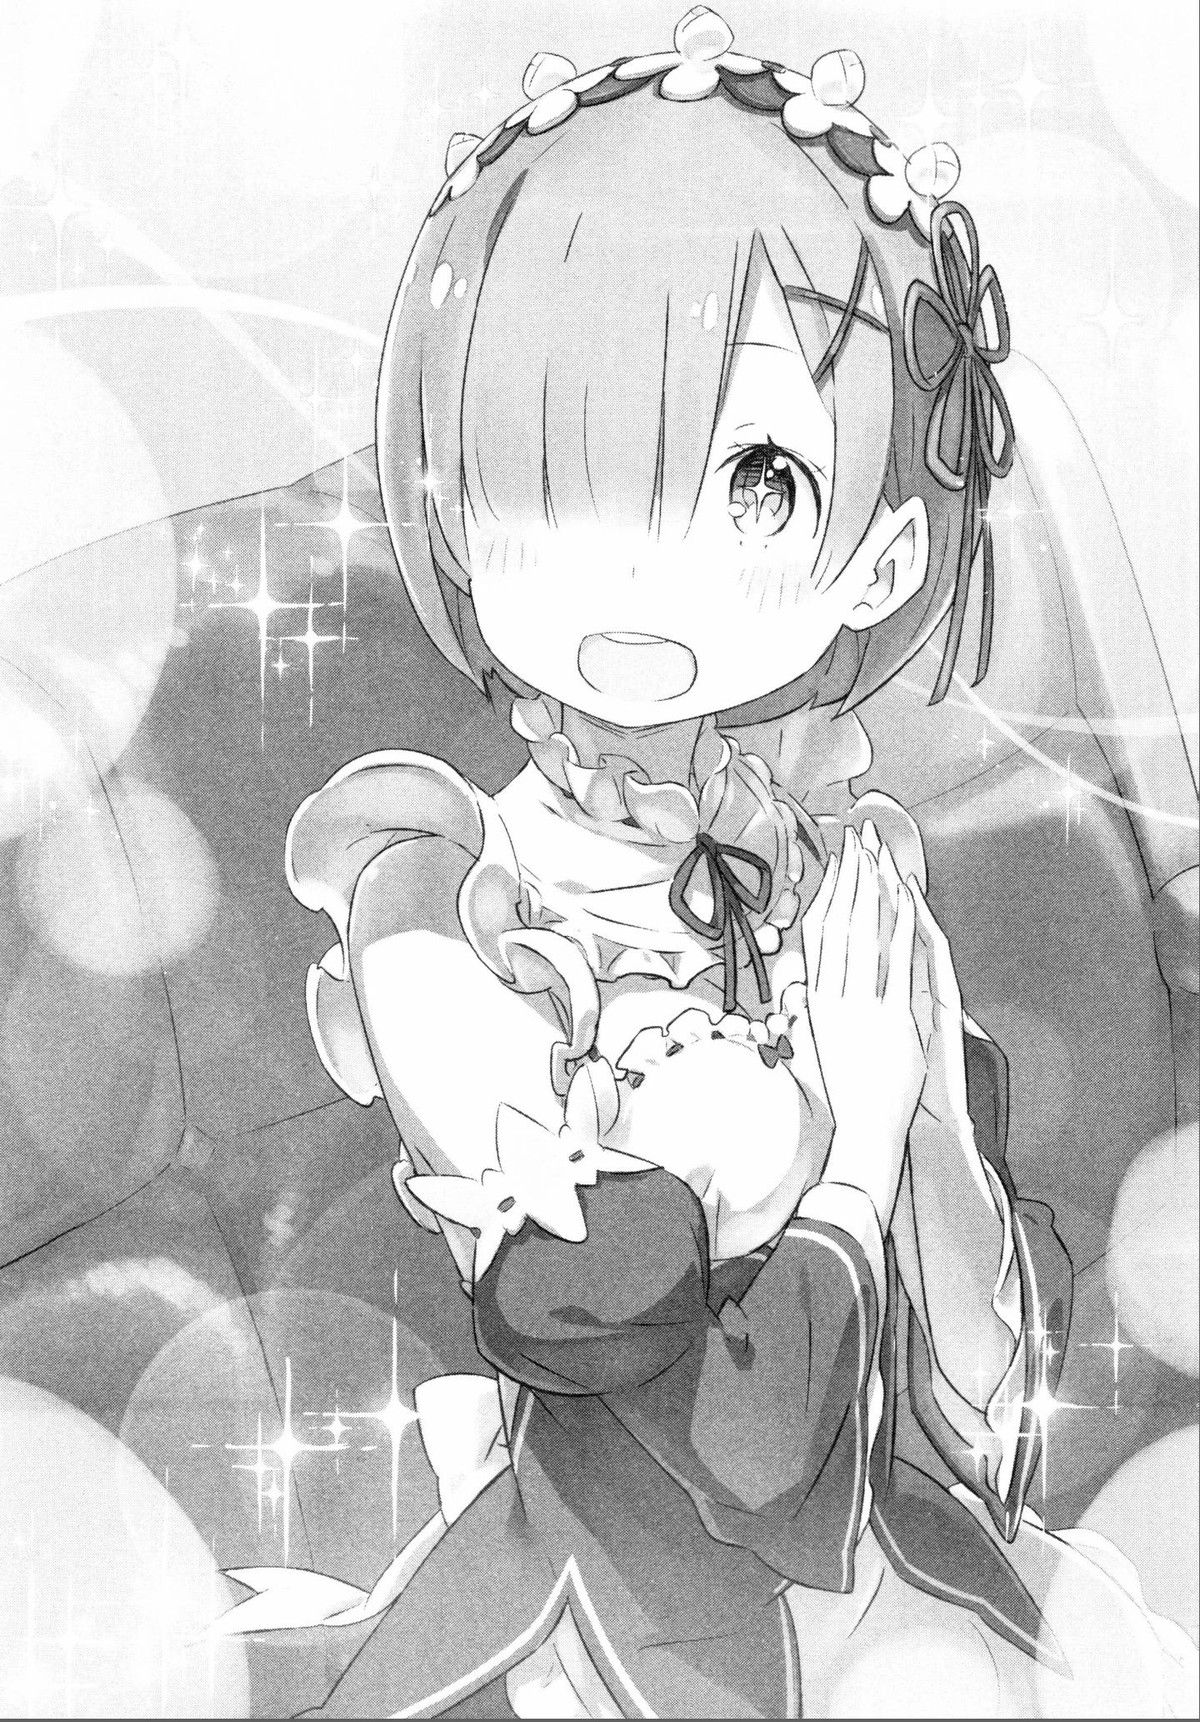 [Image and] decision wwwwwwww rezero the cutest characters. 11